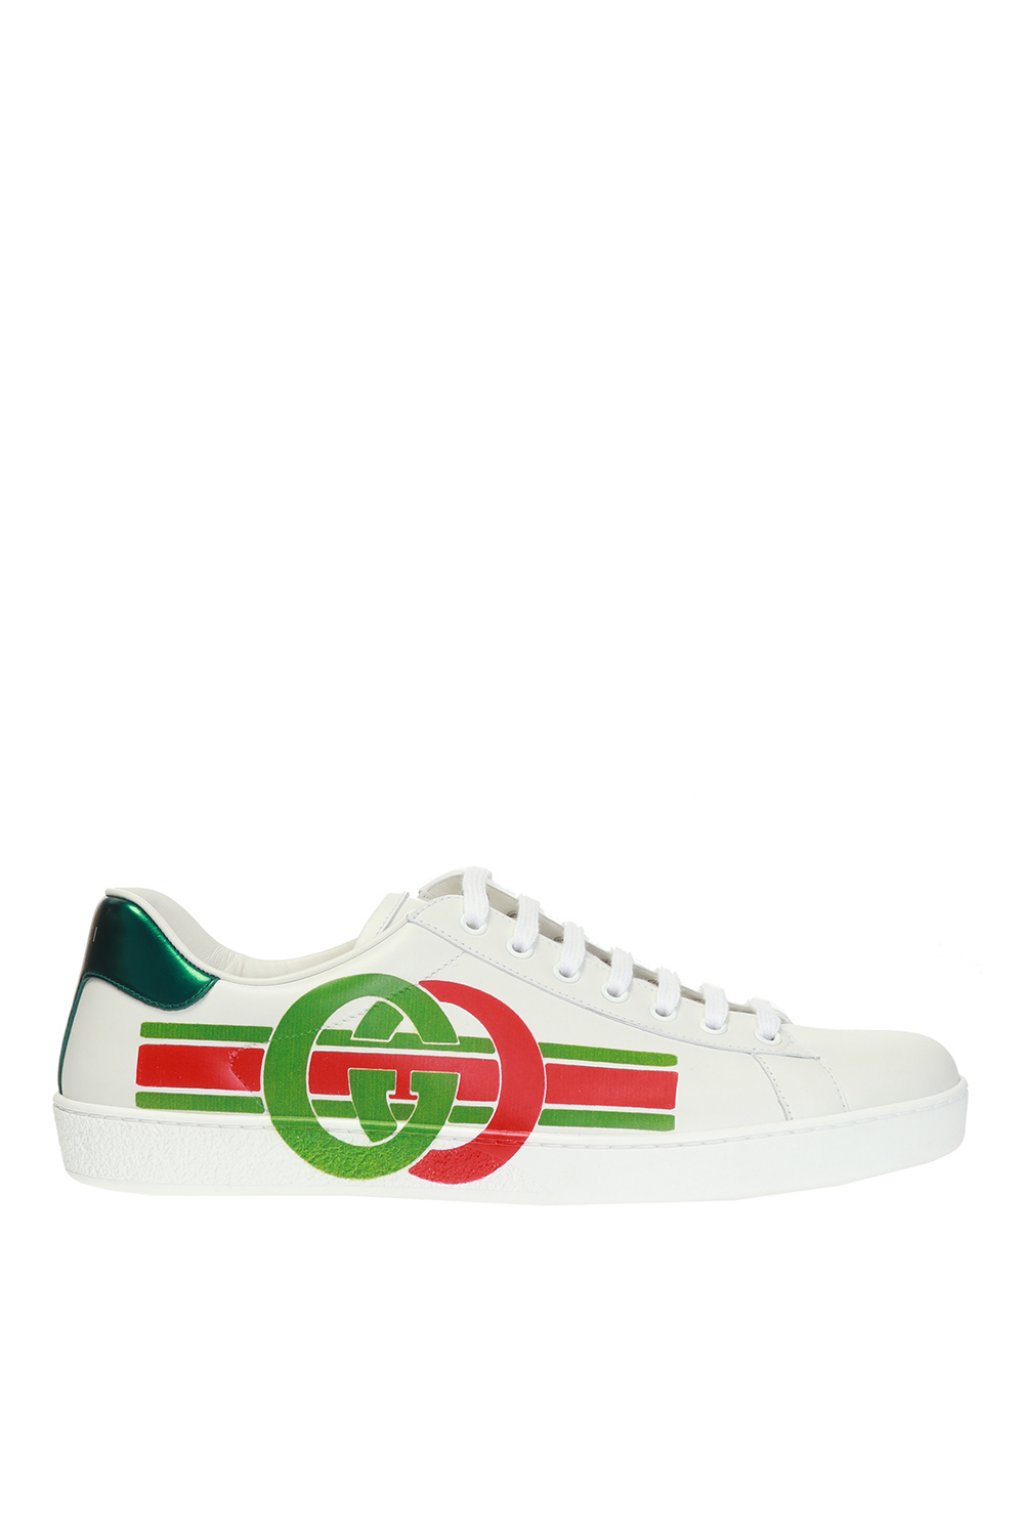 gucci ace size guide